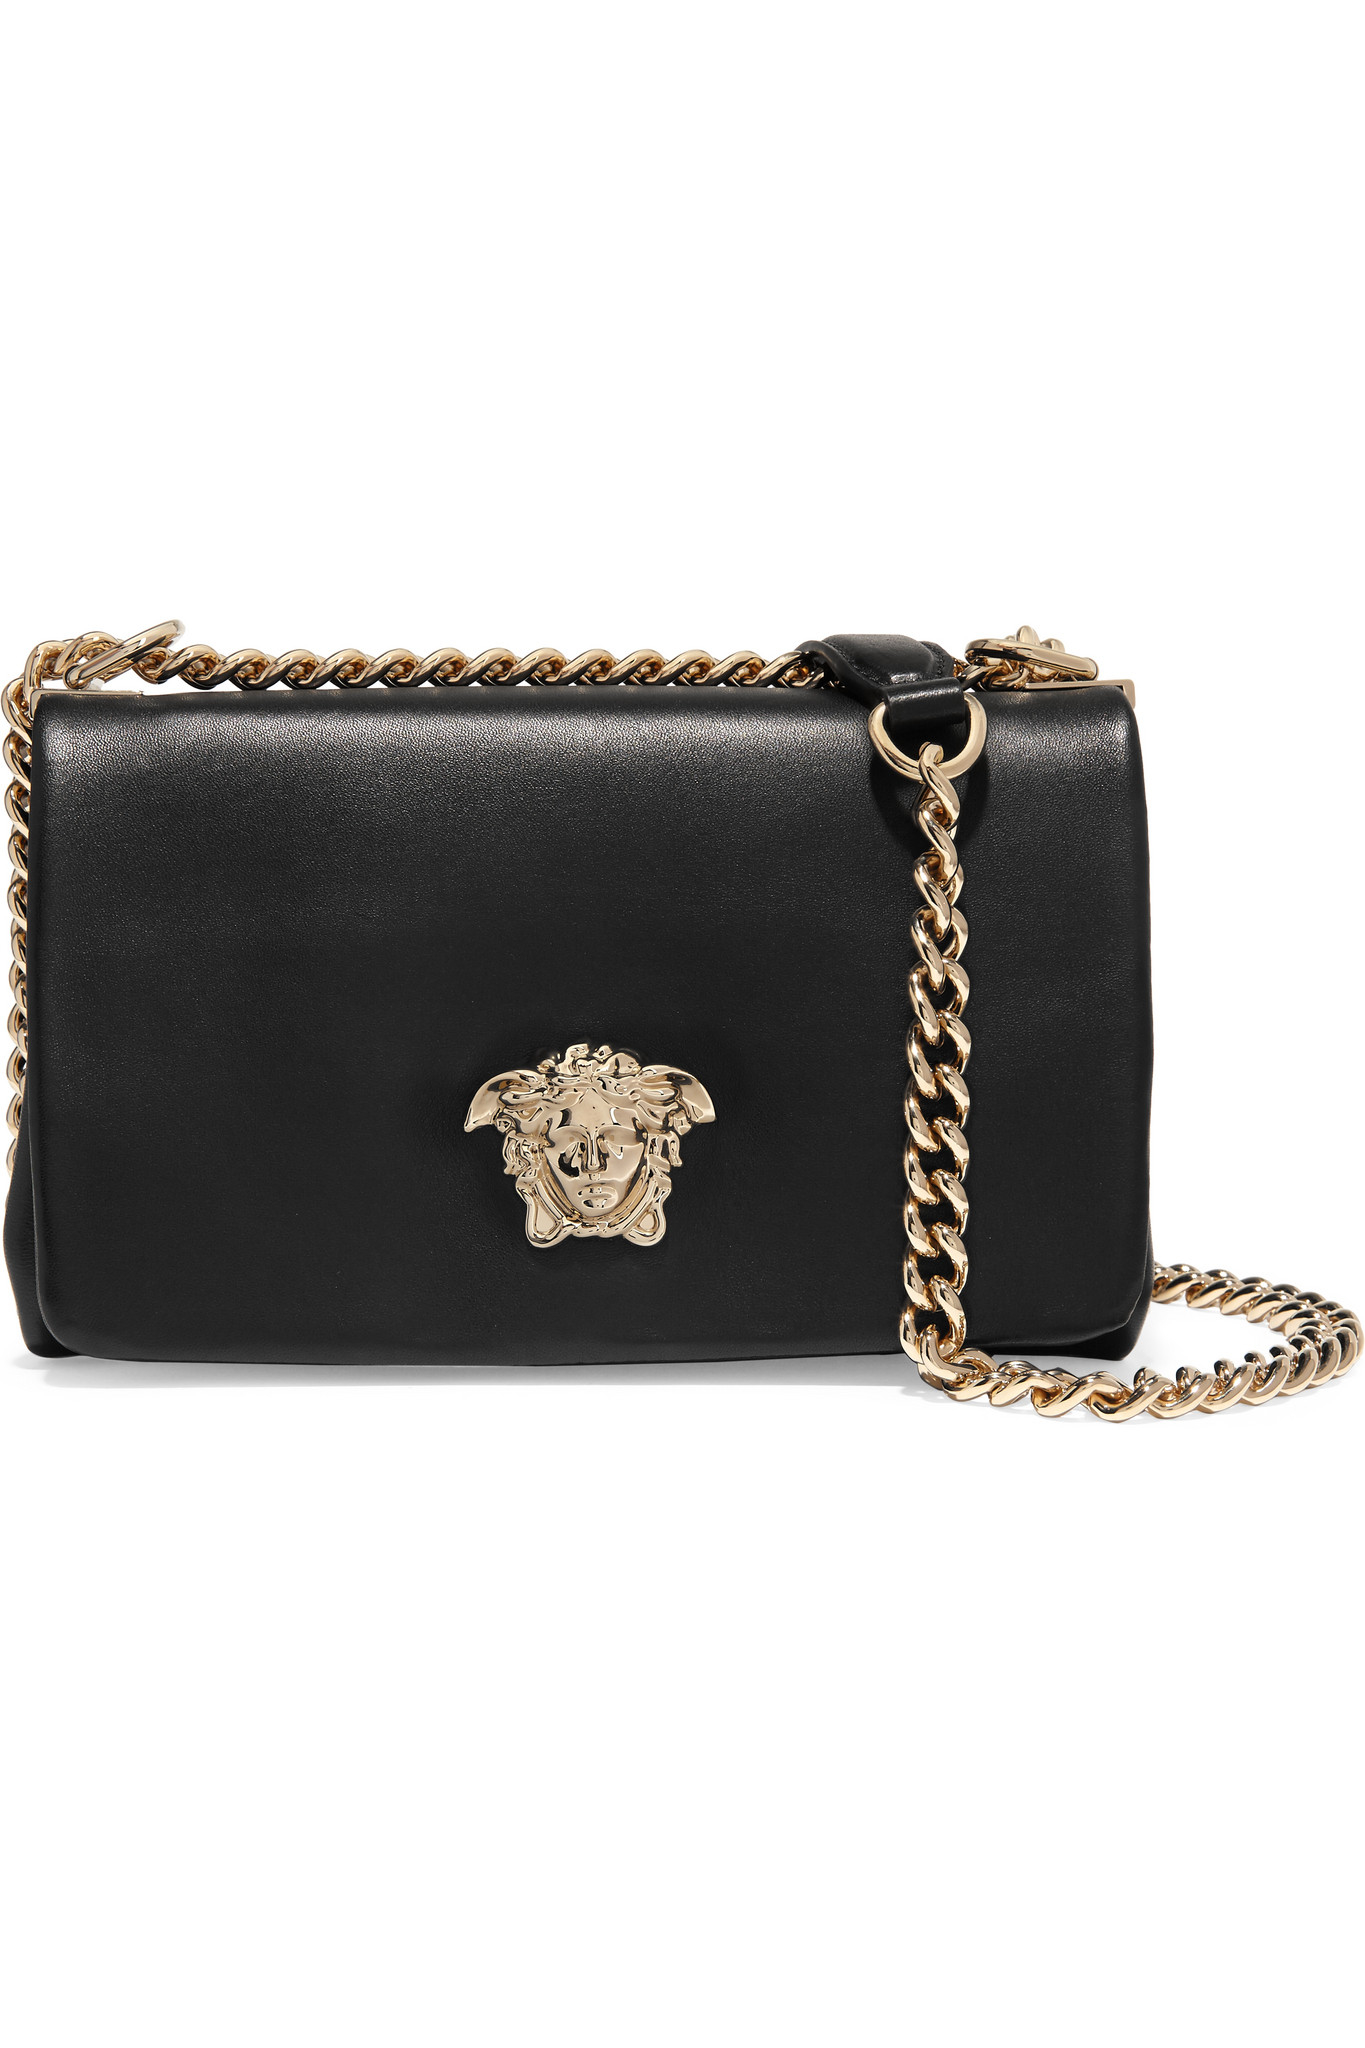 Lyst - Versace Palazzo Sultan Leather Shoulder Bag in Black